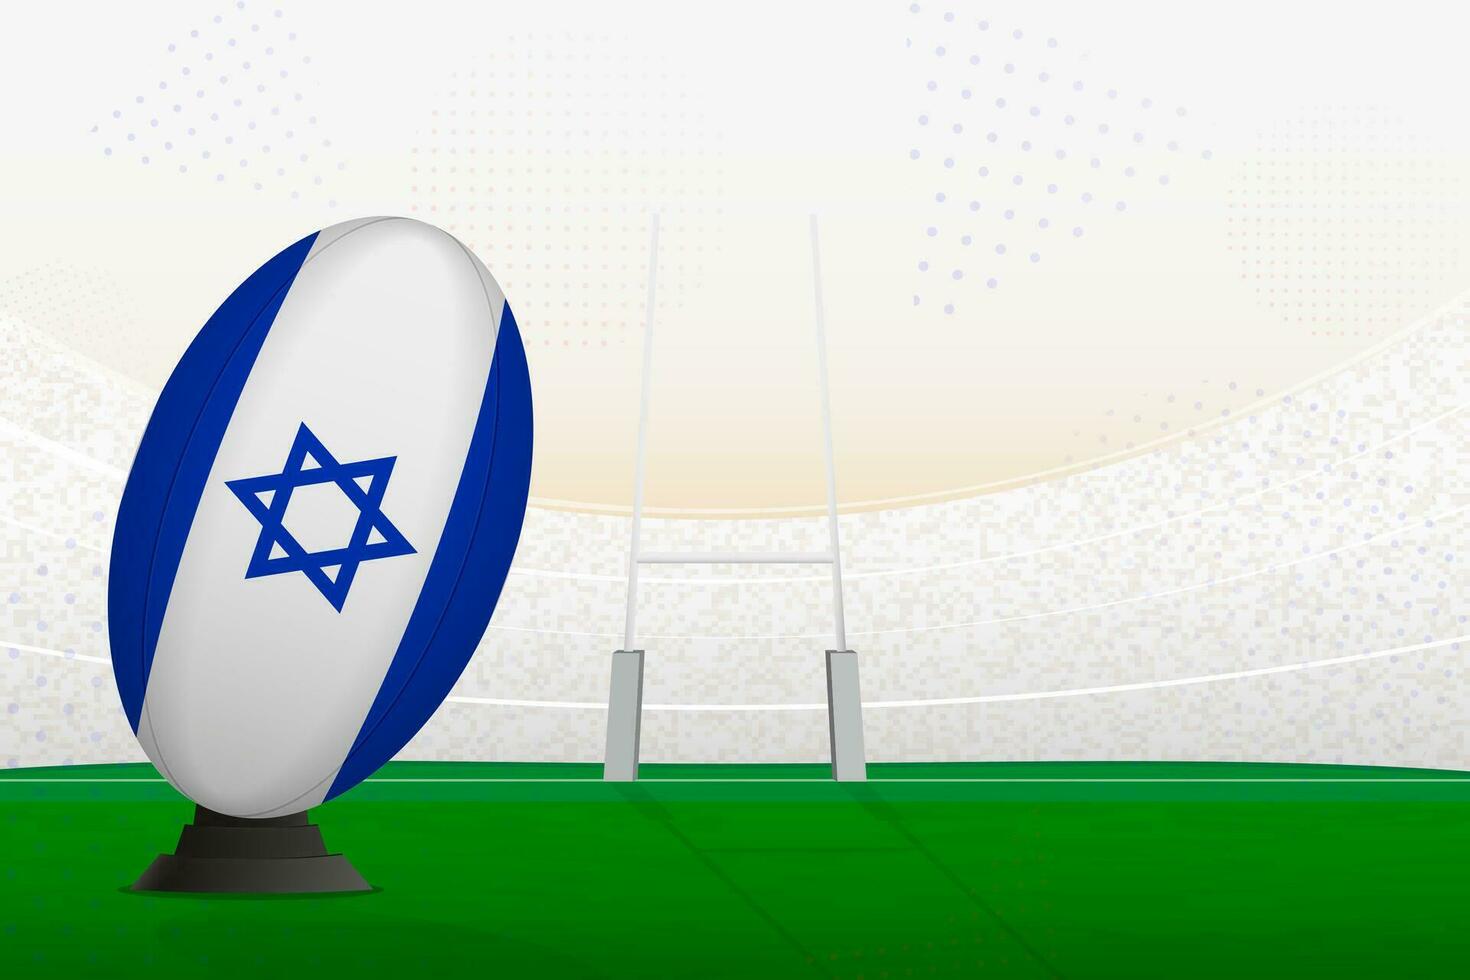 Israel national team rugby ball on rugby stadium and goal posts, preparing for a penalty or free kick. vector